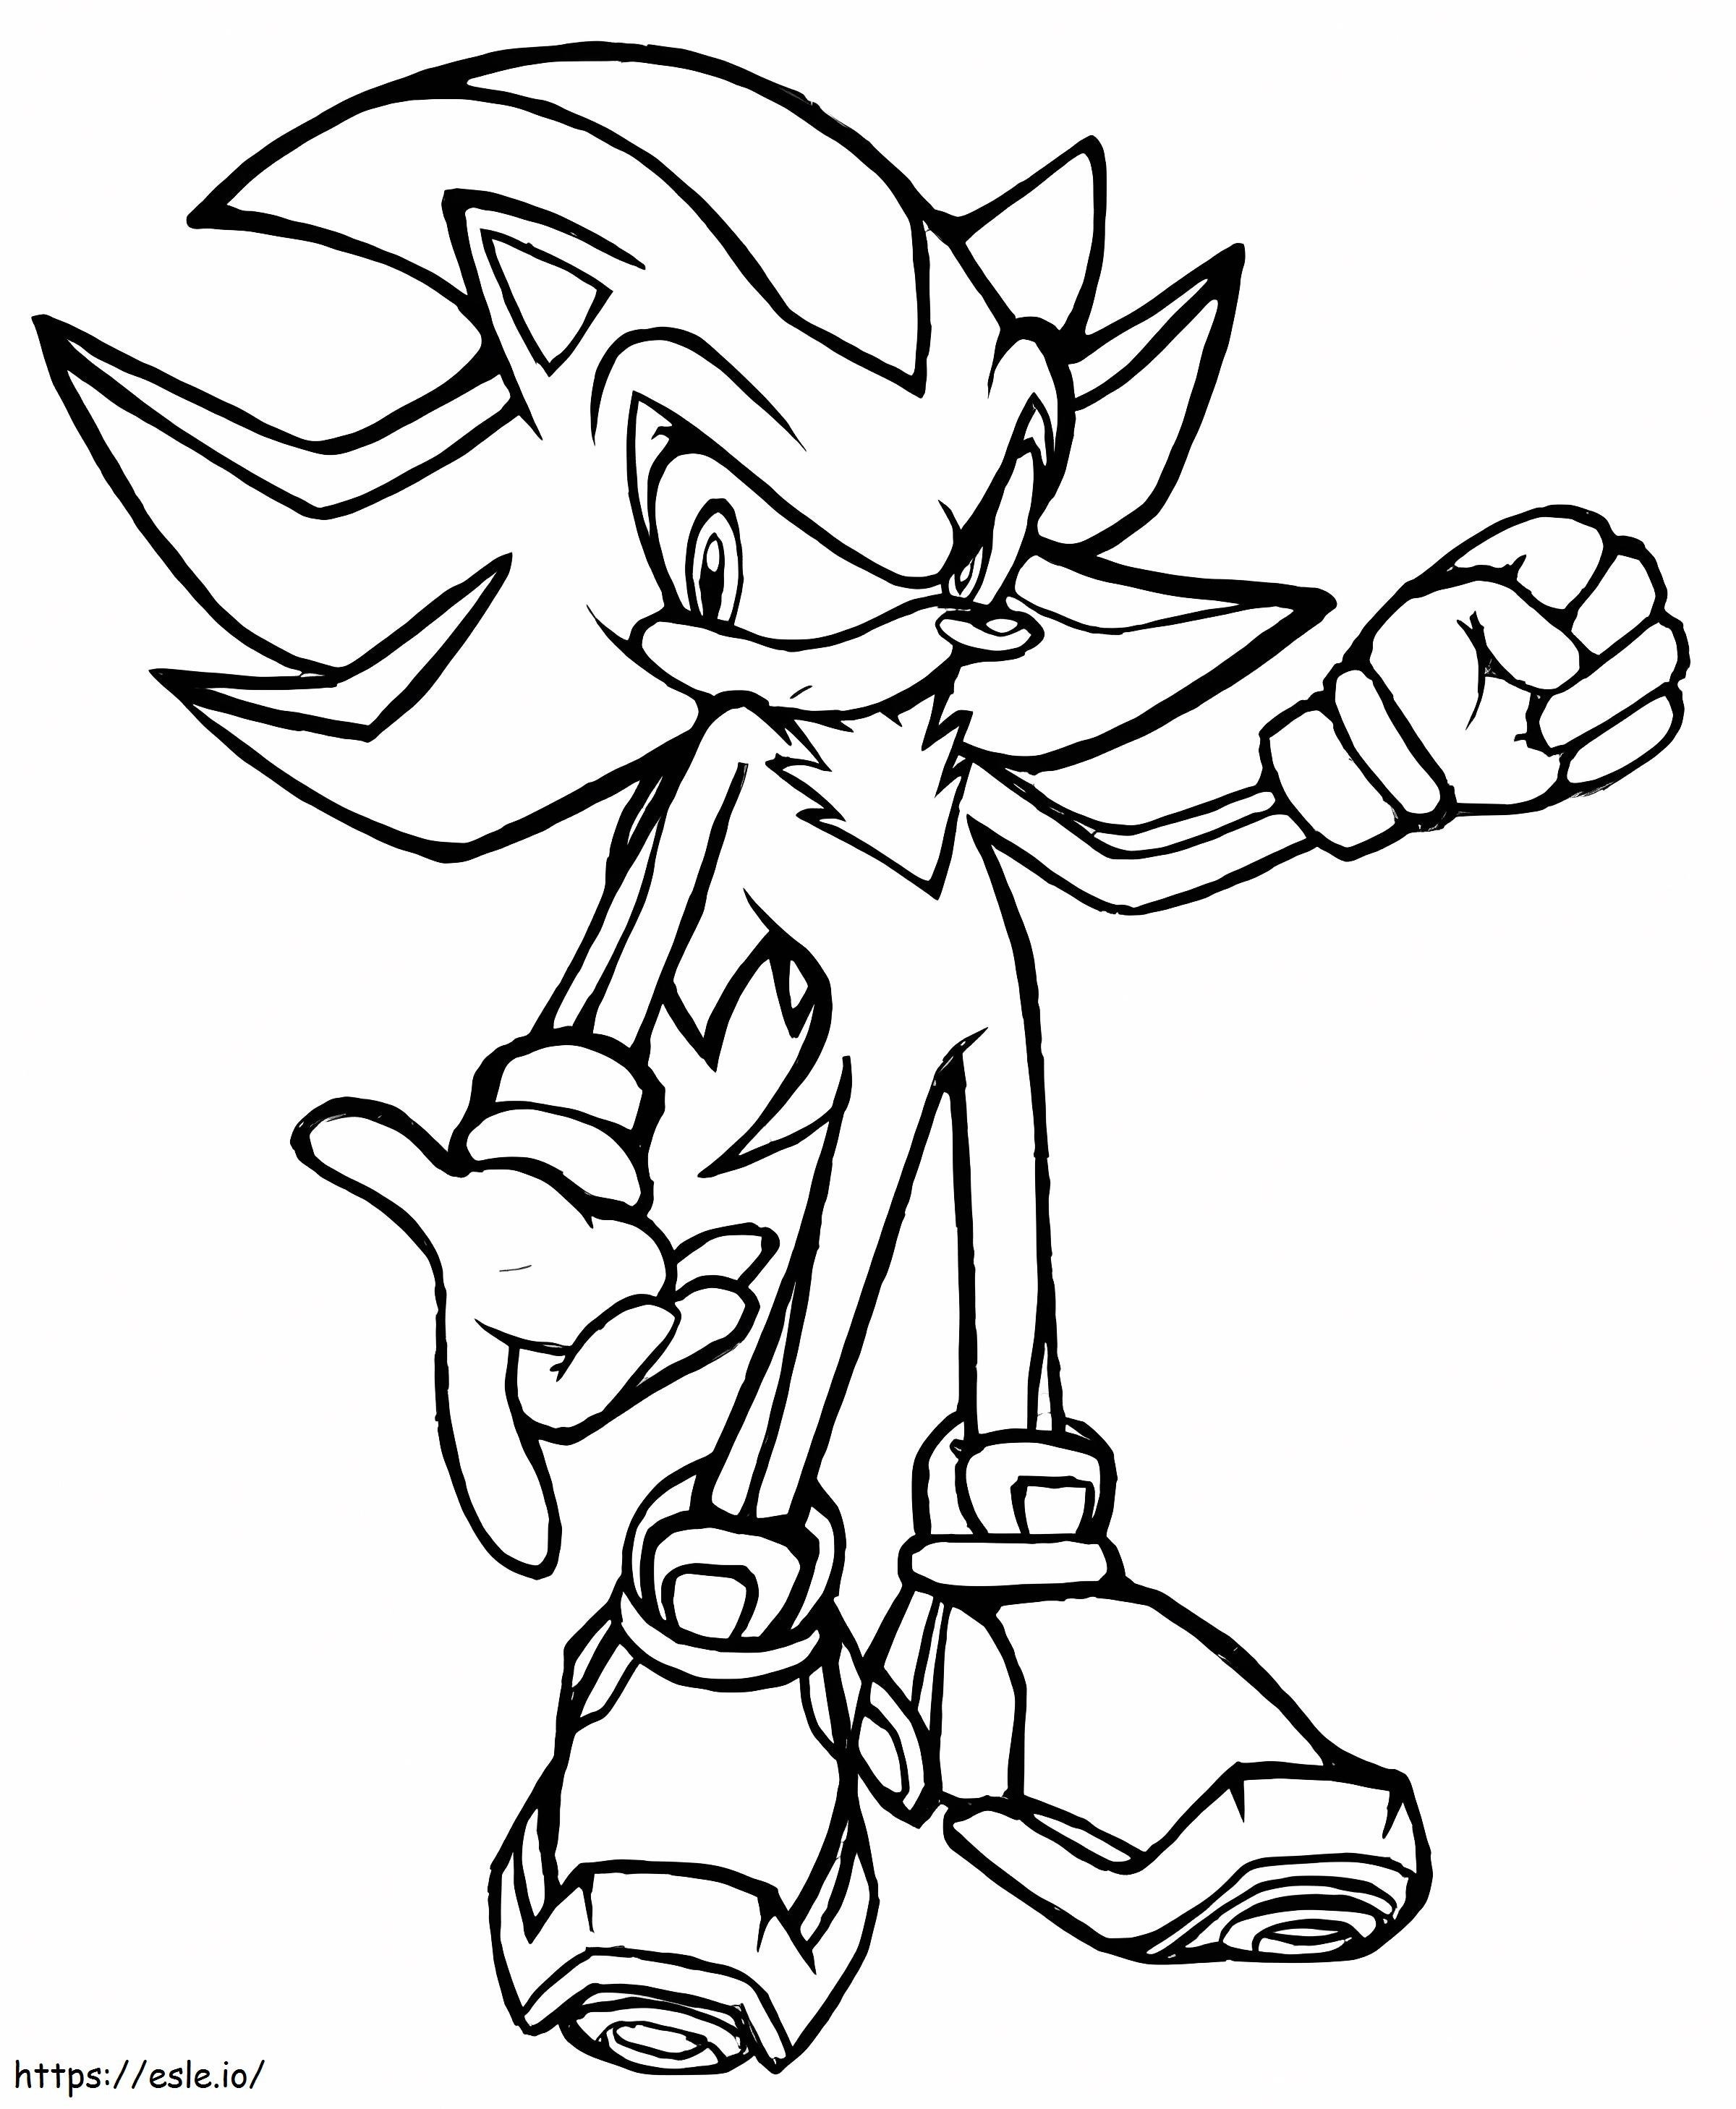 Amazing Shadow The Hedgehog coloring page